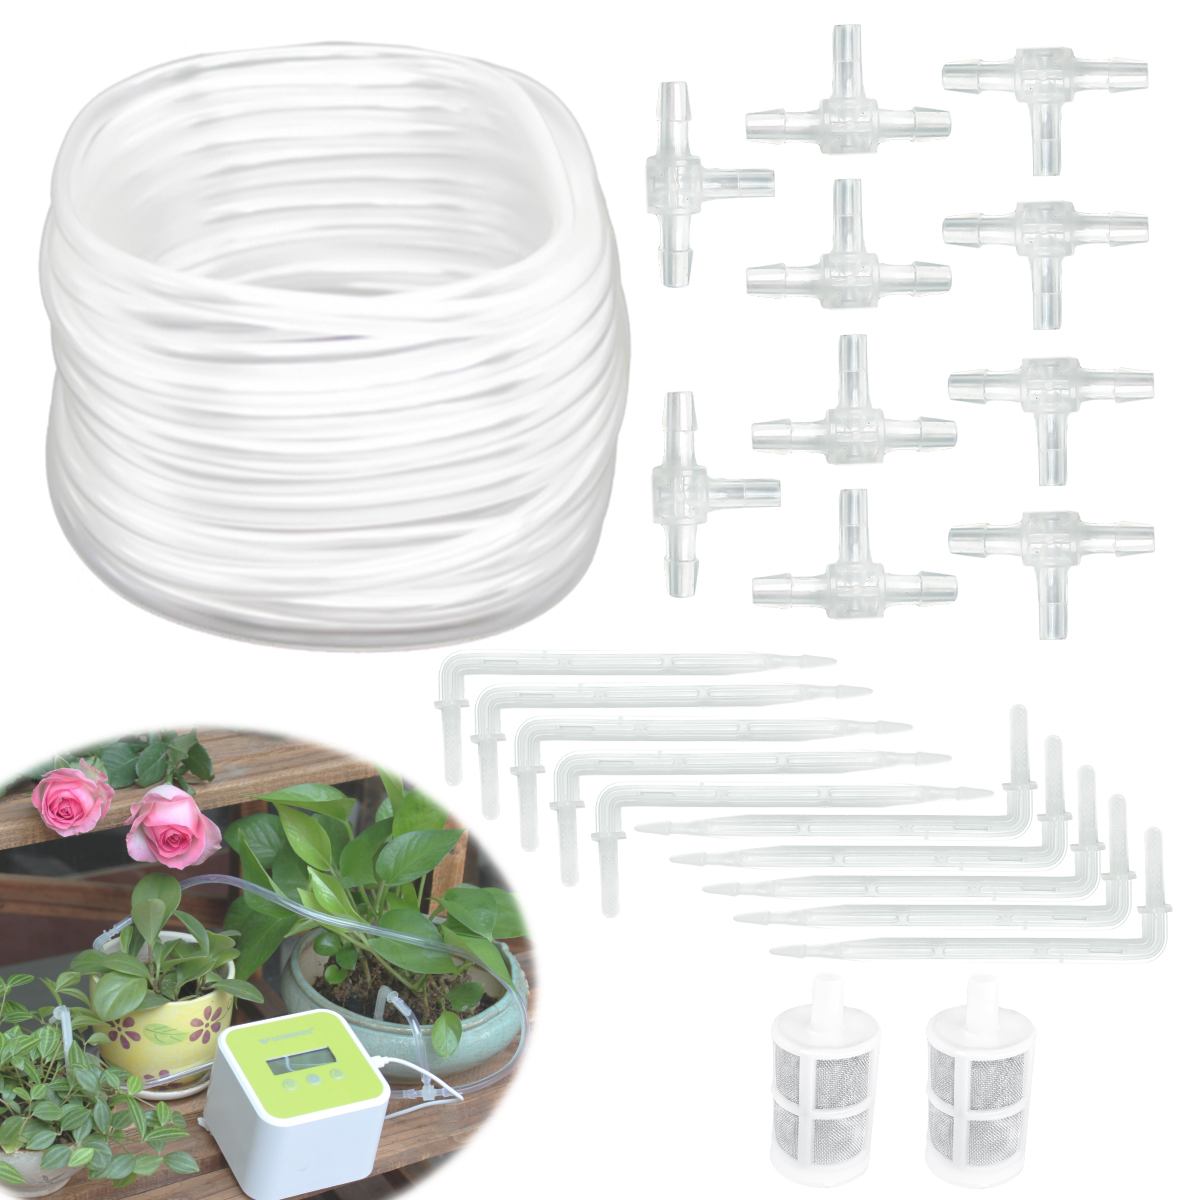 Automatic Irrigation Drip Kit,32ft Drip Irrigation Tubing & Accessories for Drip Sprinkler System